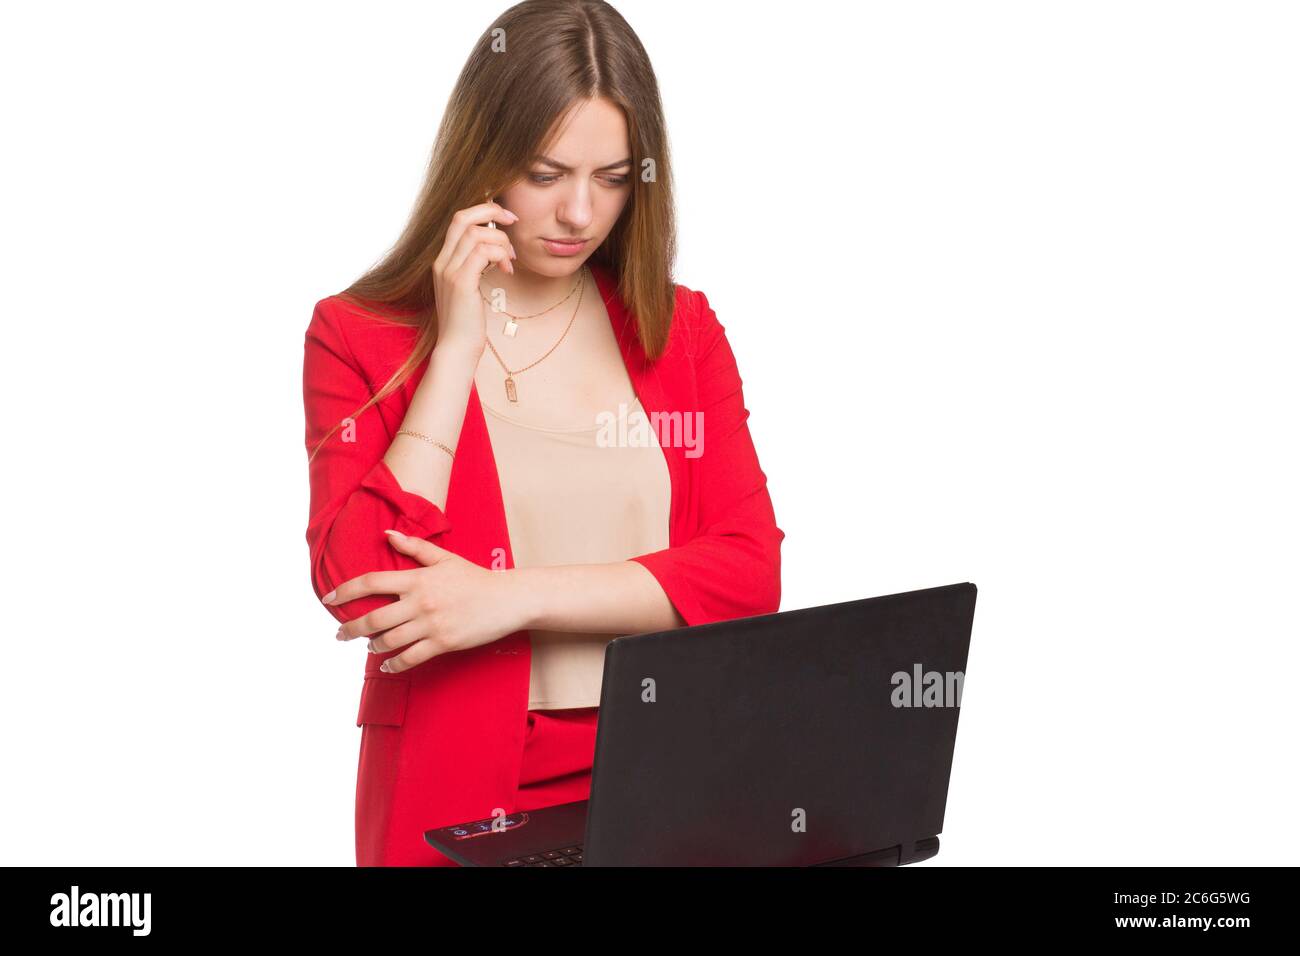 A young business office woman in a red suit a background isolated in white, holding a laptop, and talking on a smartphone Stock Photo